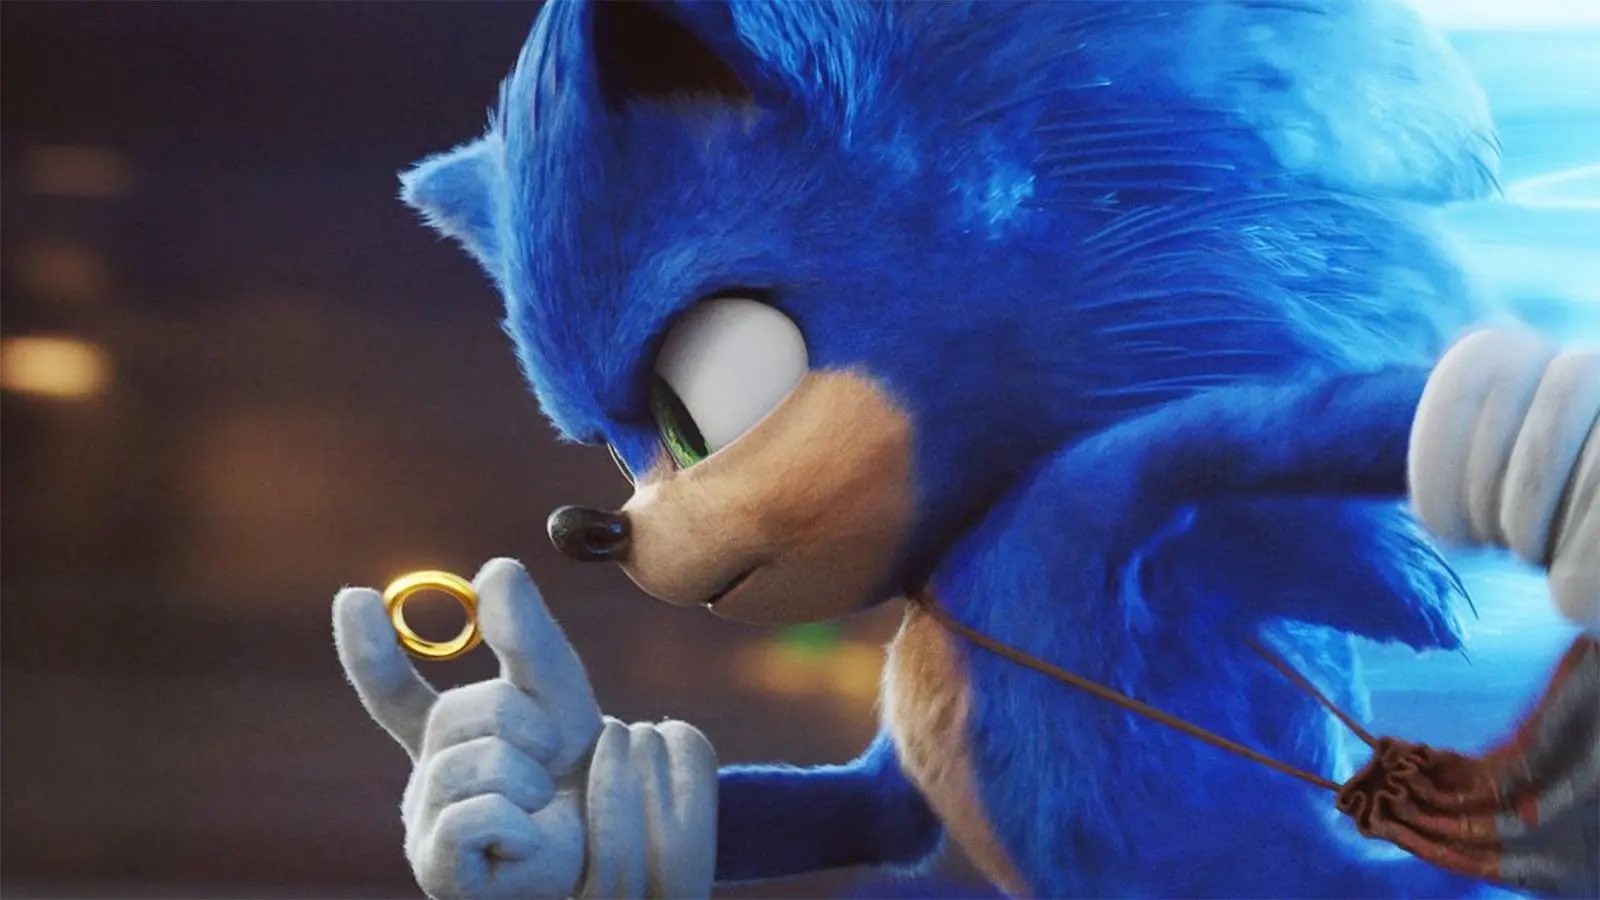 RUMOR: First Sonic The Hedgehog 3 Teaser to Debut at ShowEast